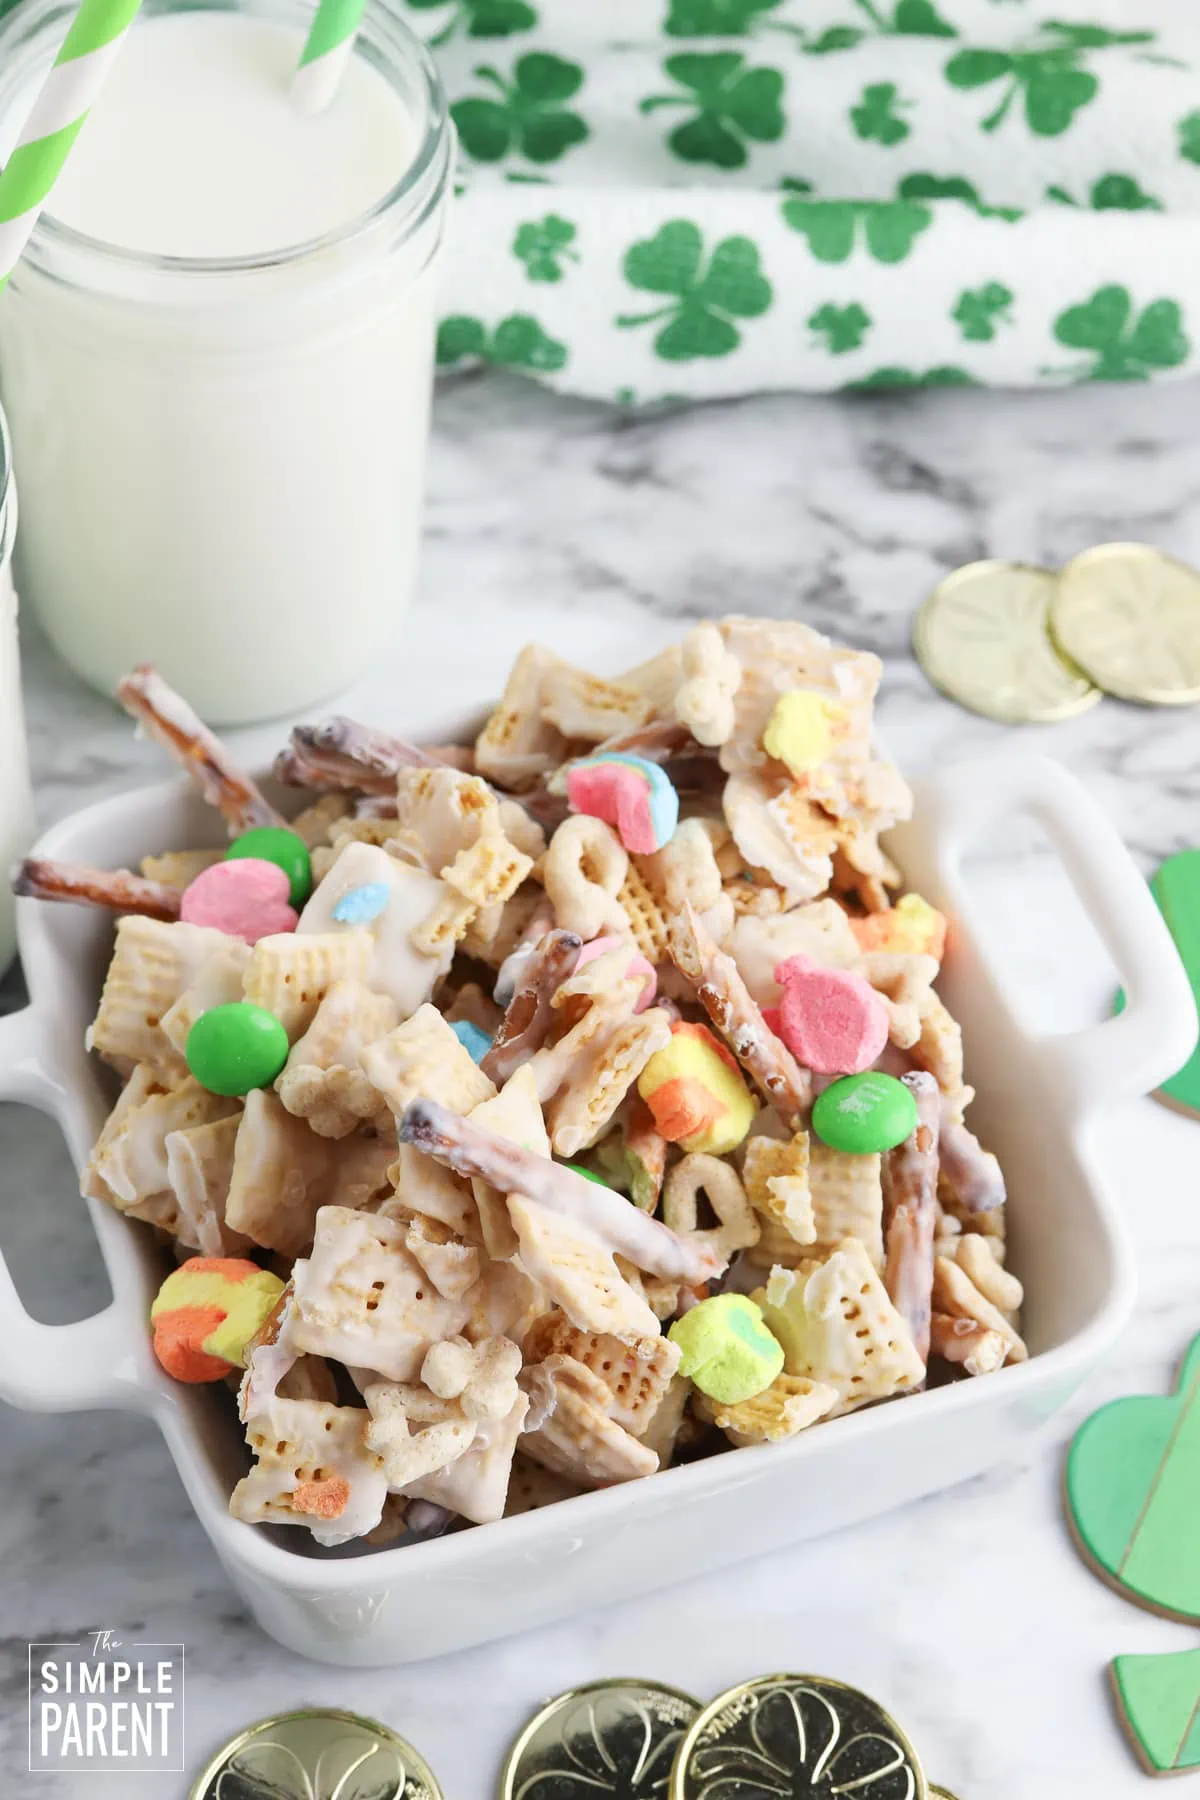 Leprechaun snacks mix in white serving bowl with glass of milk